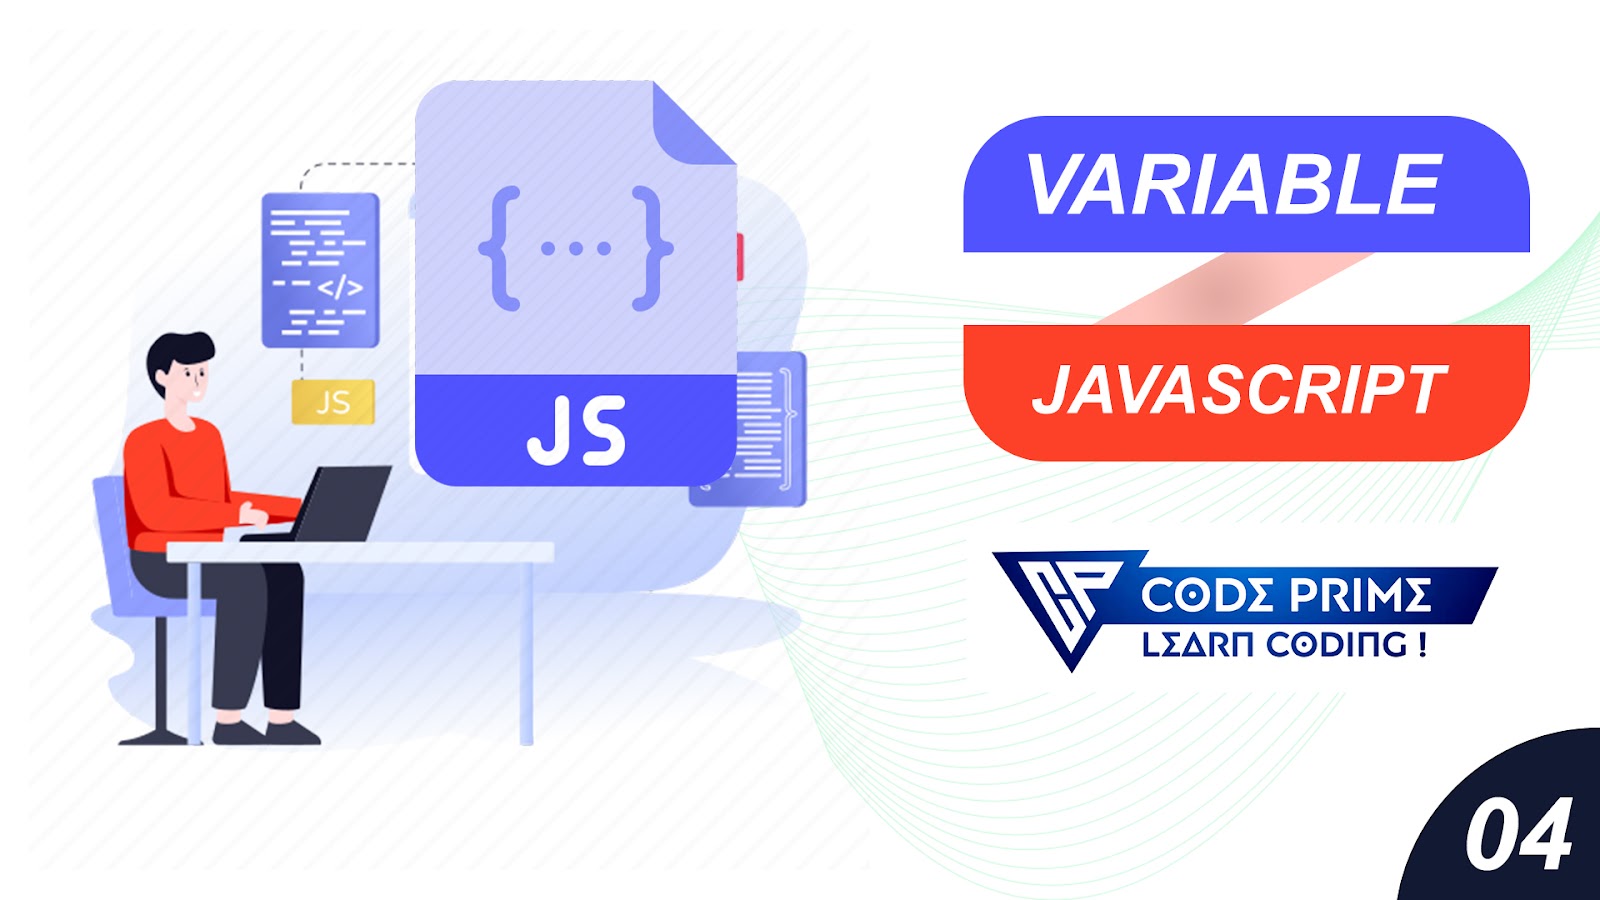 global variable javascript,
types of variables in javascript,
string to variable javascript,
var vs let javascript,
scope of variables in javascript,
var function javascript,
var java,
javascript let,codeprime, coding tutorial, how to learn coding easy way to learn coding